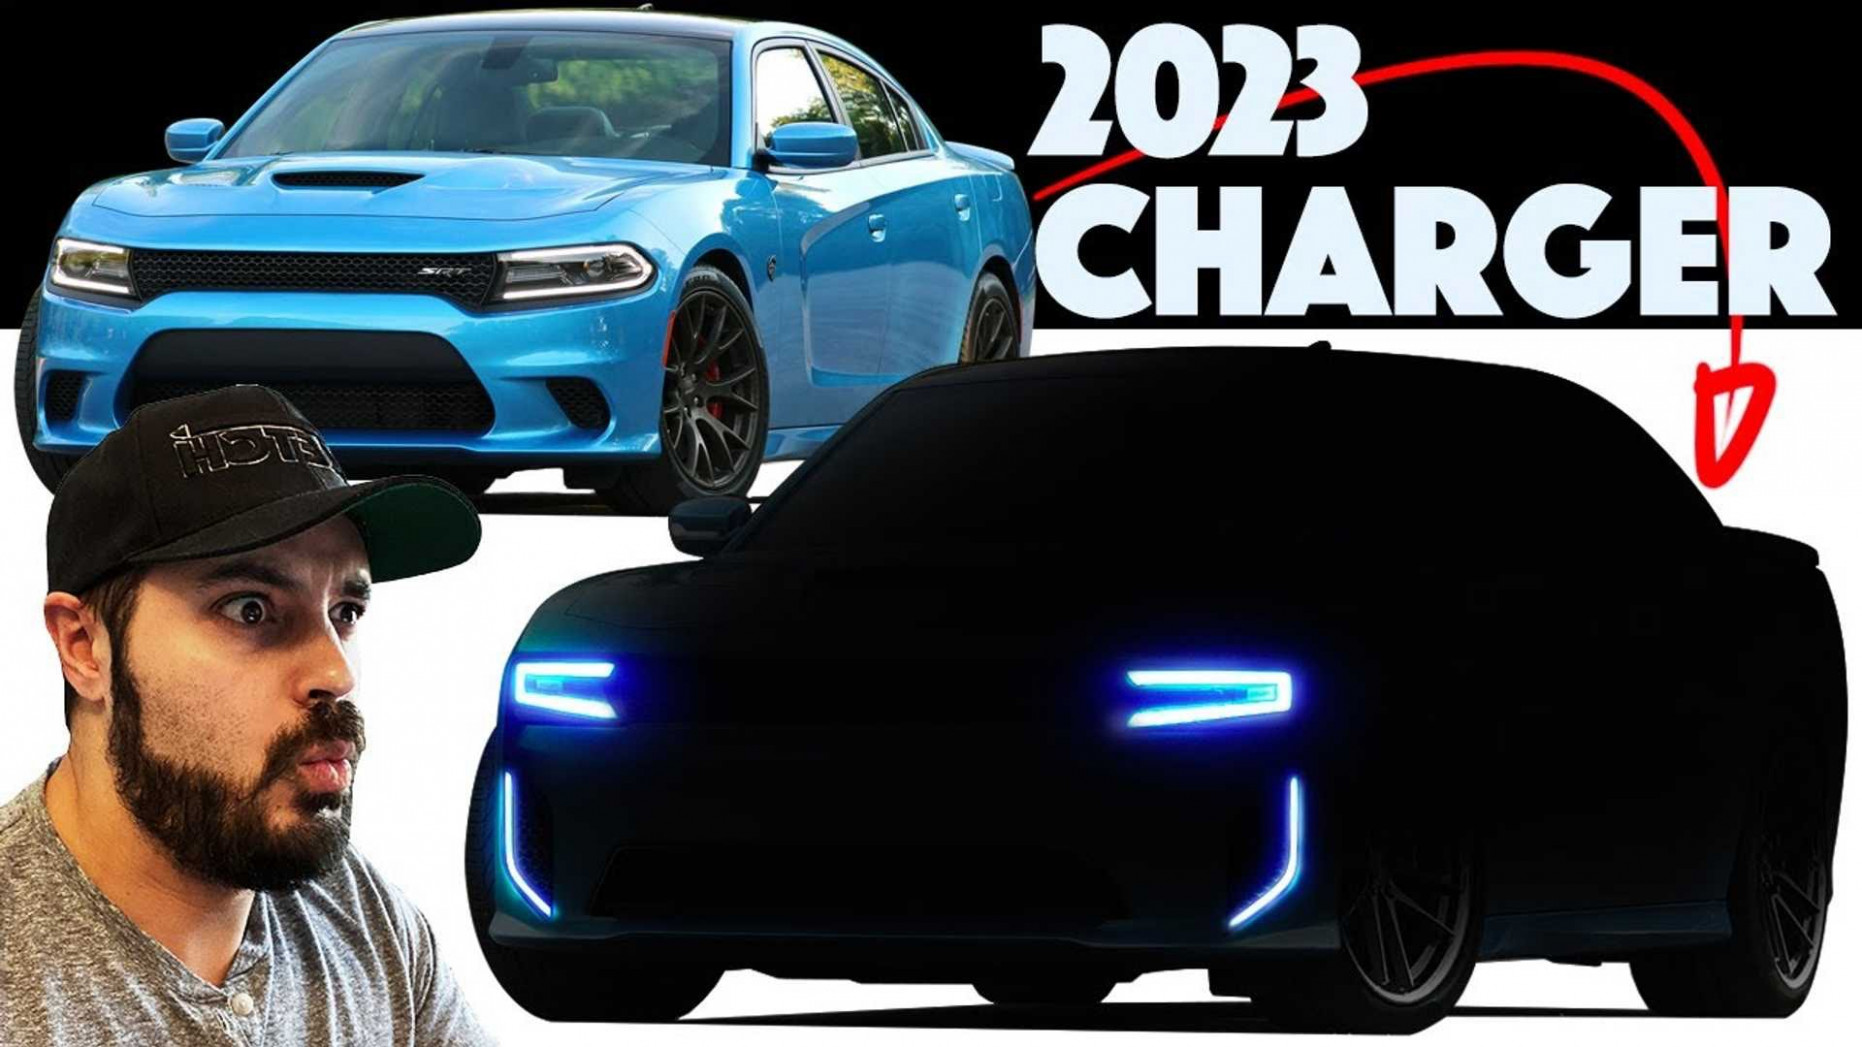 Exterior and Interior 2023 Dodge Charger Srt 8